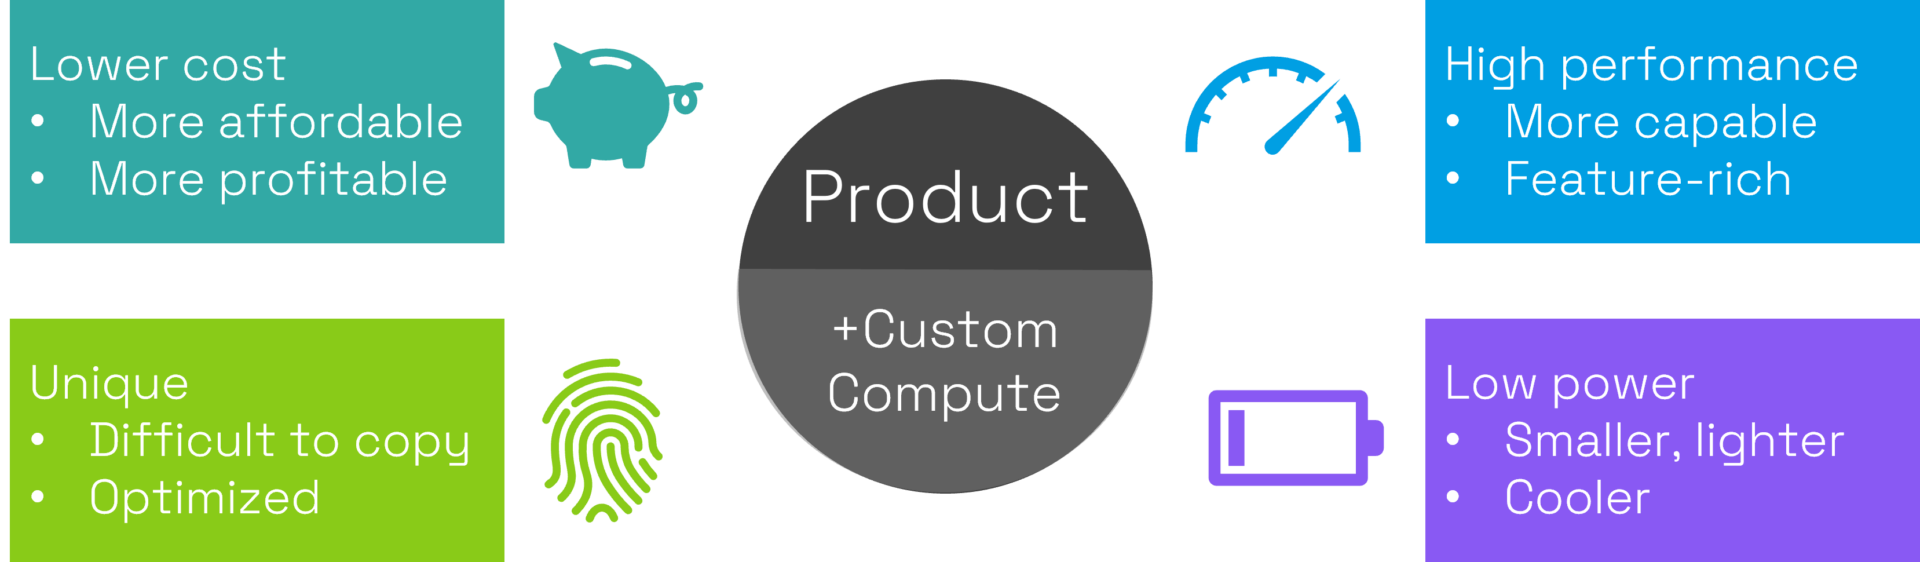 Benefits of Custom Compute for end products